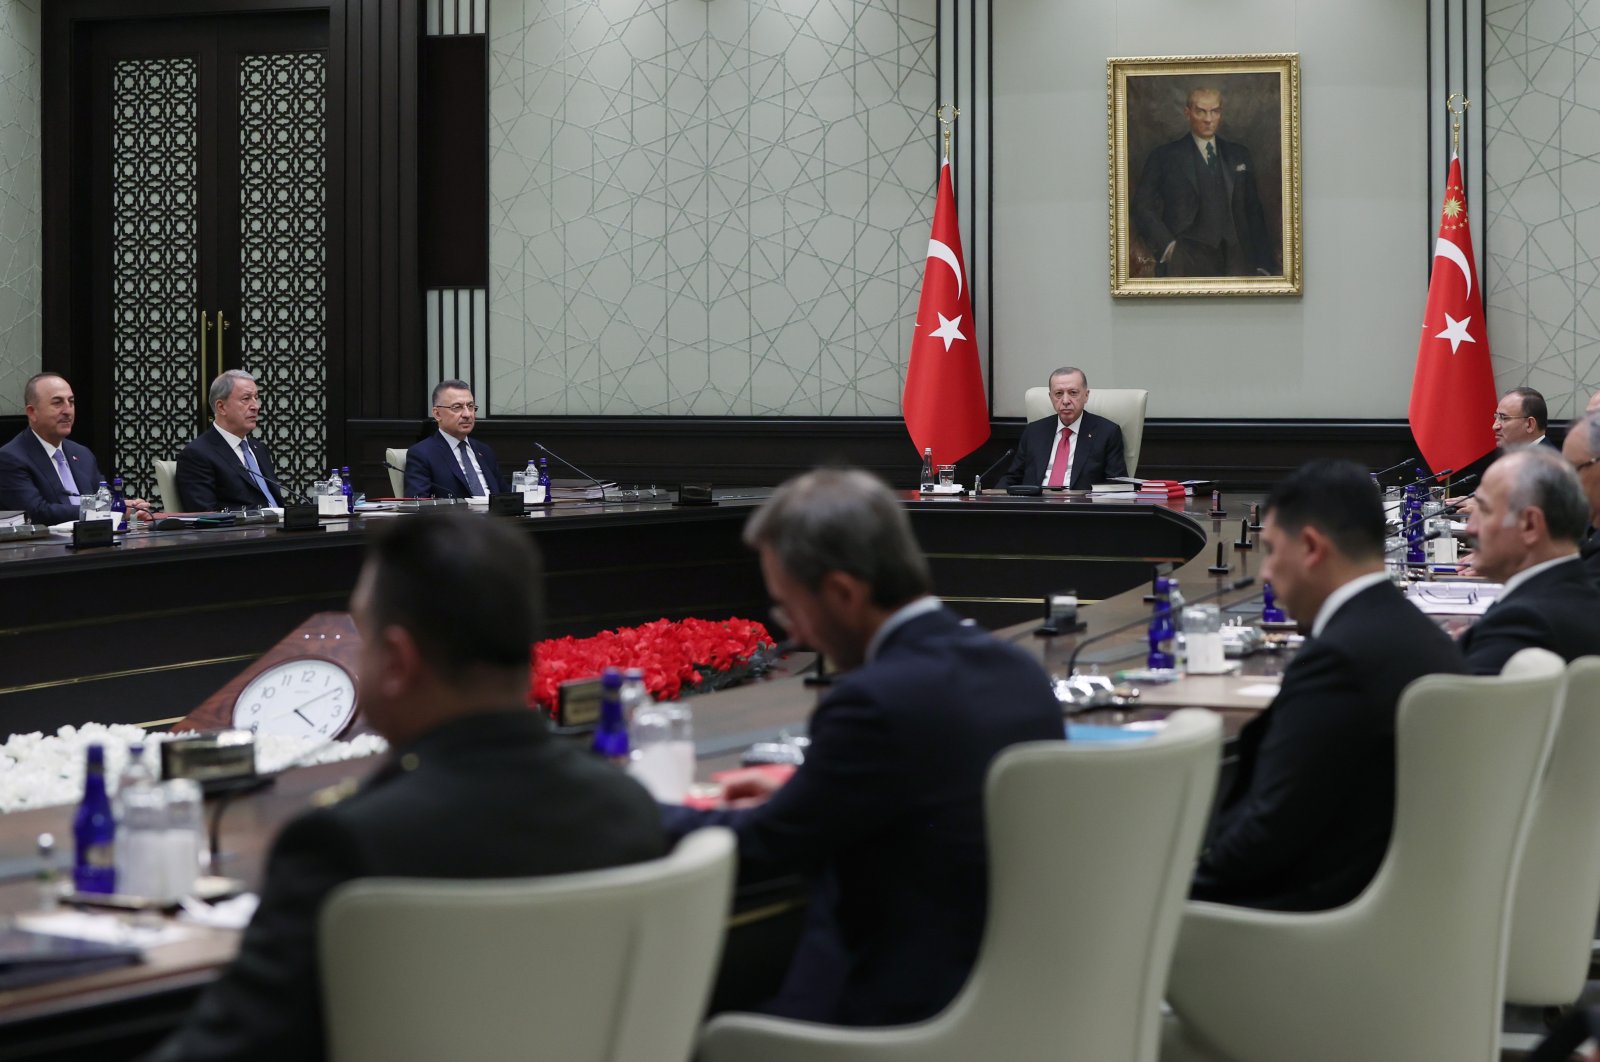 President Recep Tayyip Erdoğan (C) and Turkish officials attend the National Security Council meeting in Ankara, Turkey, May 26, 2022. (DHA Photo)